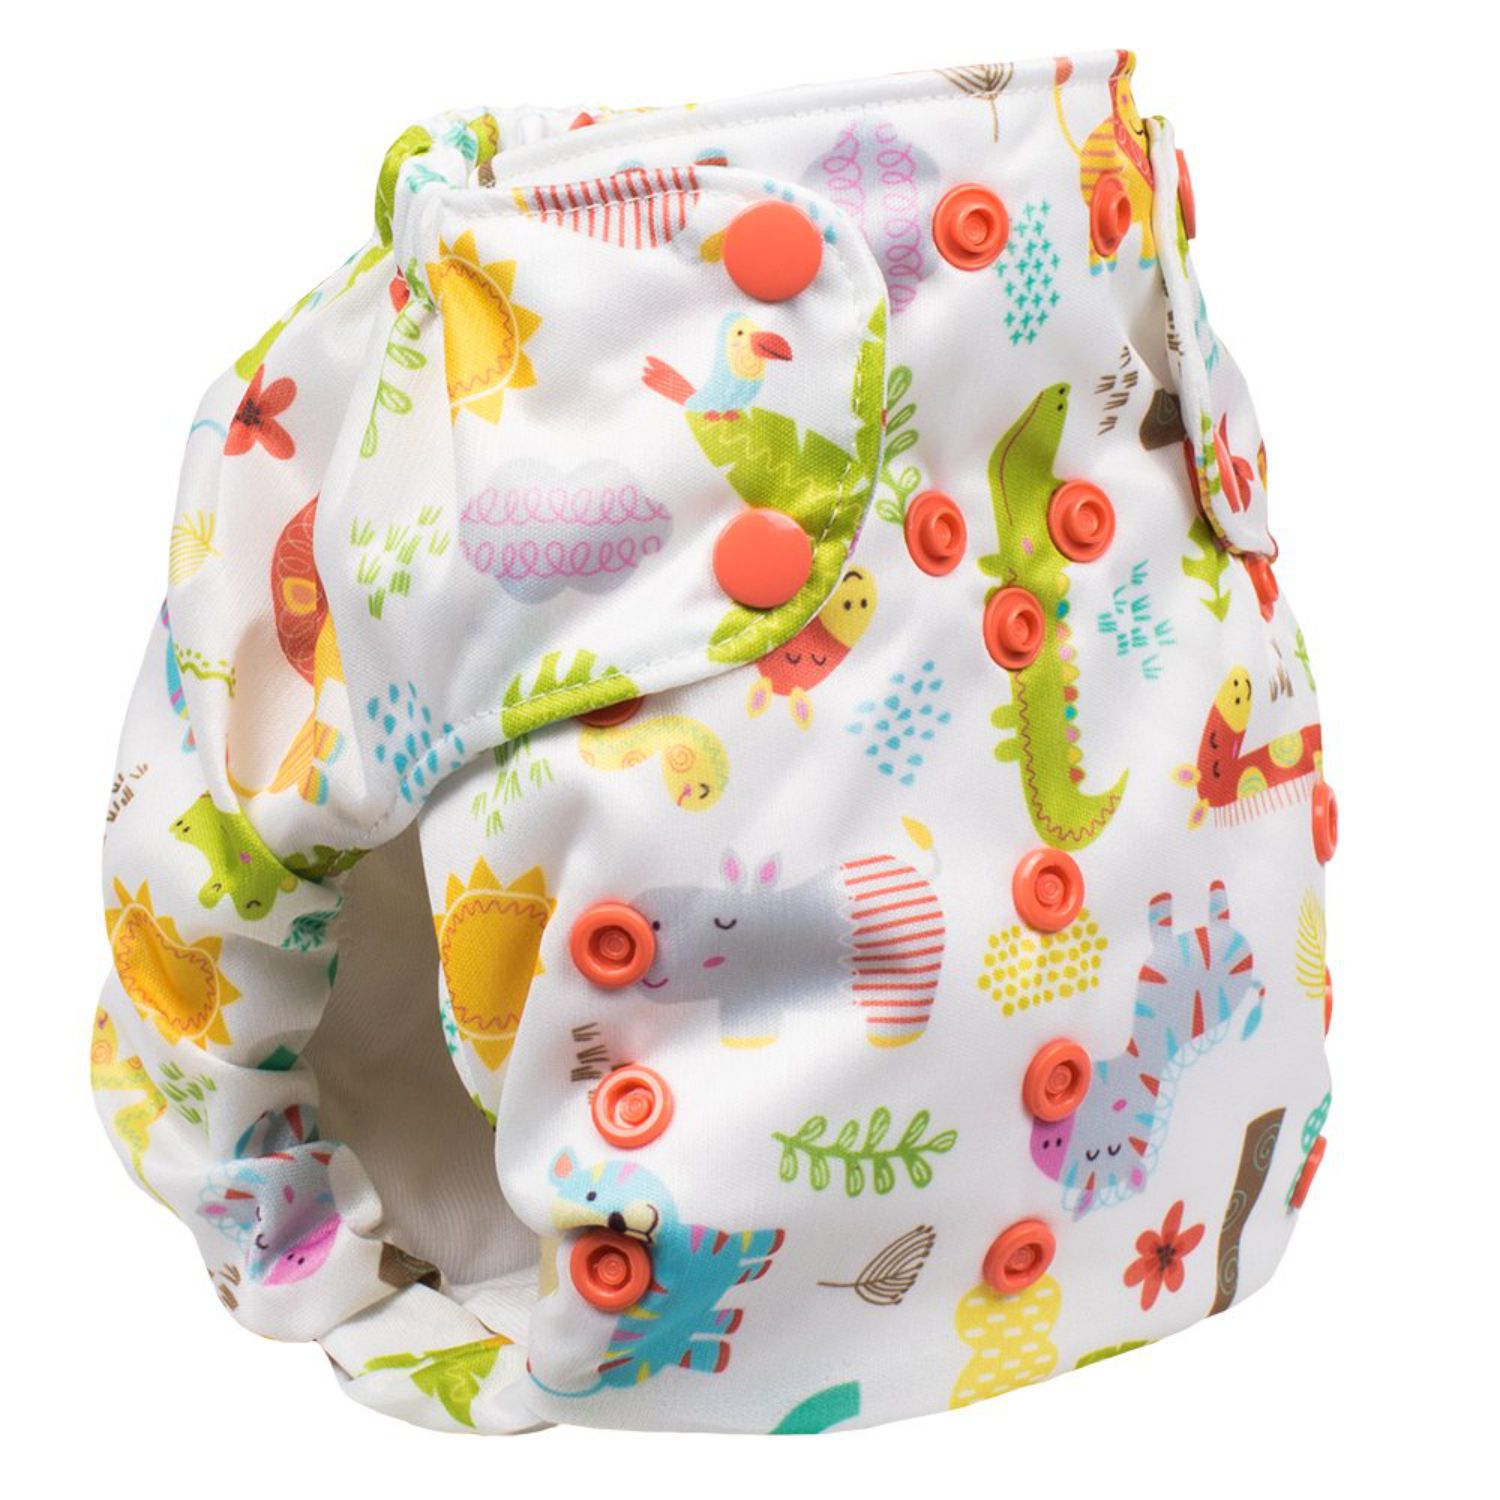 Smart Bottoms Dream Diaper 2.0 AIO One Size Pattern: Wild About you